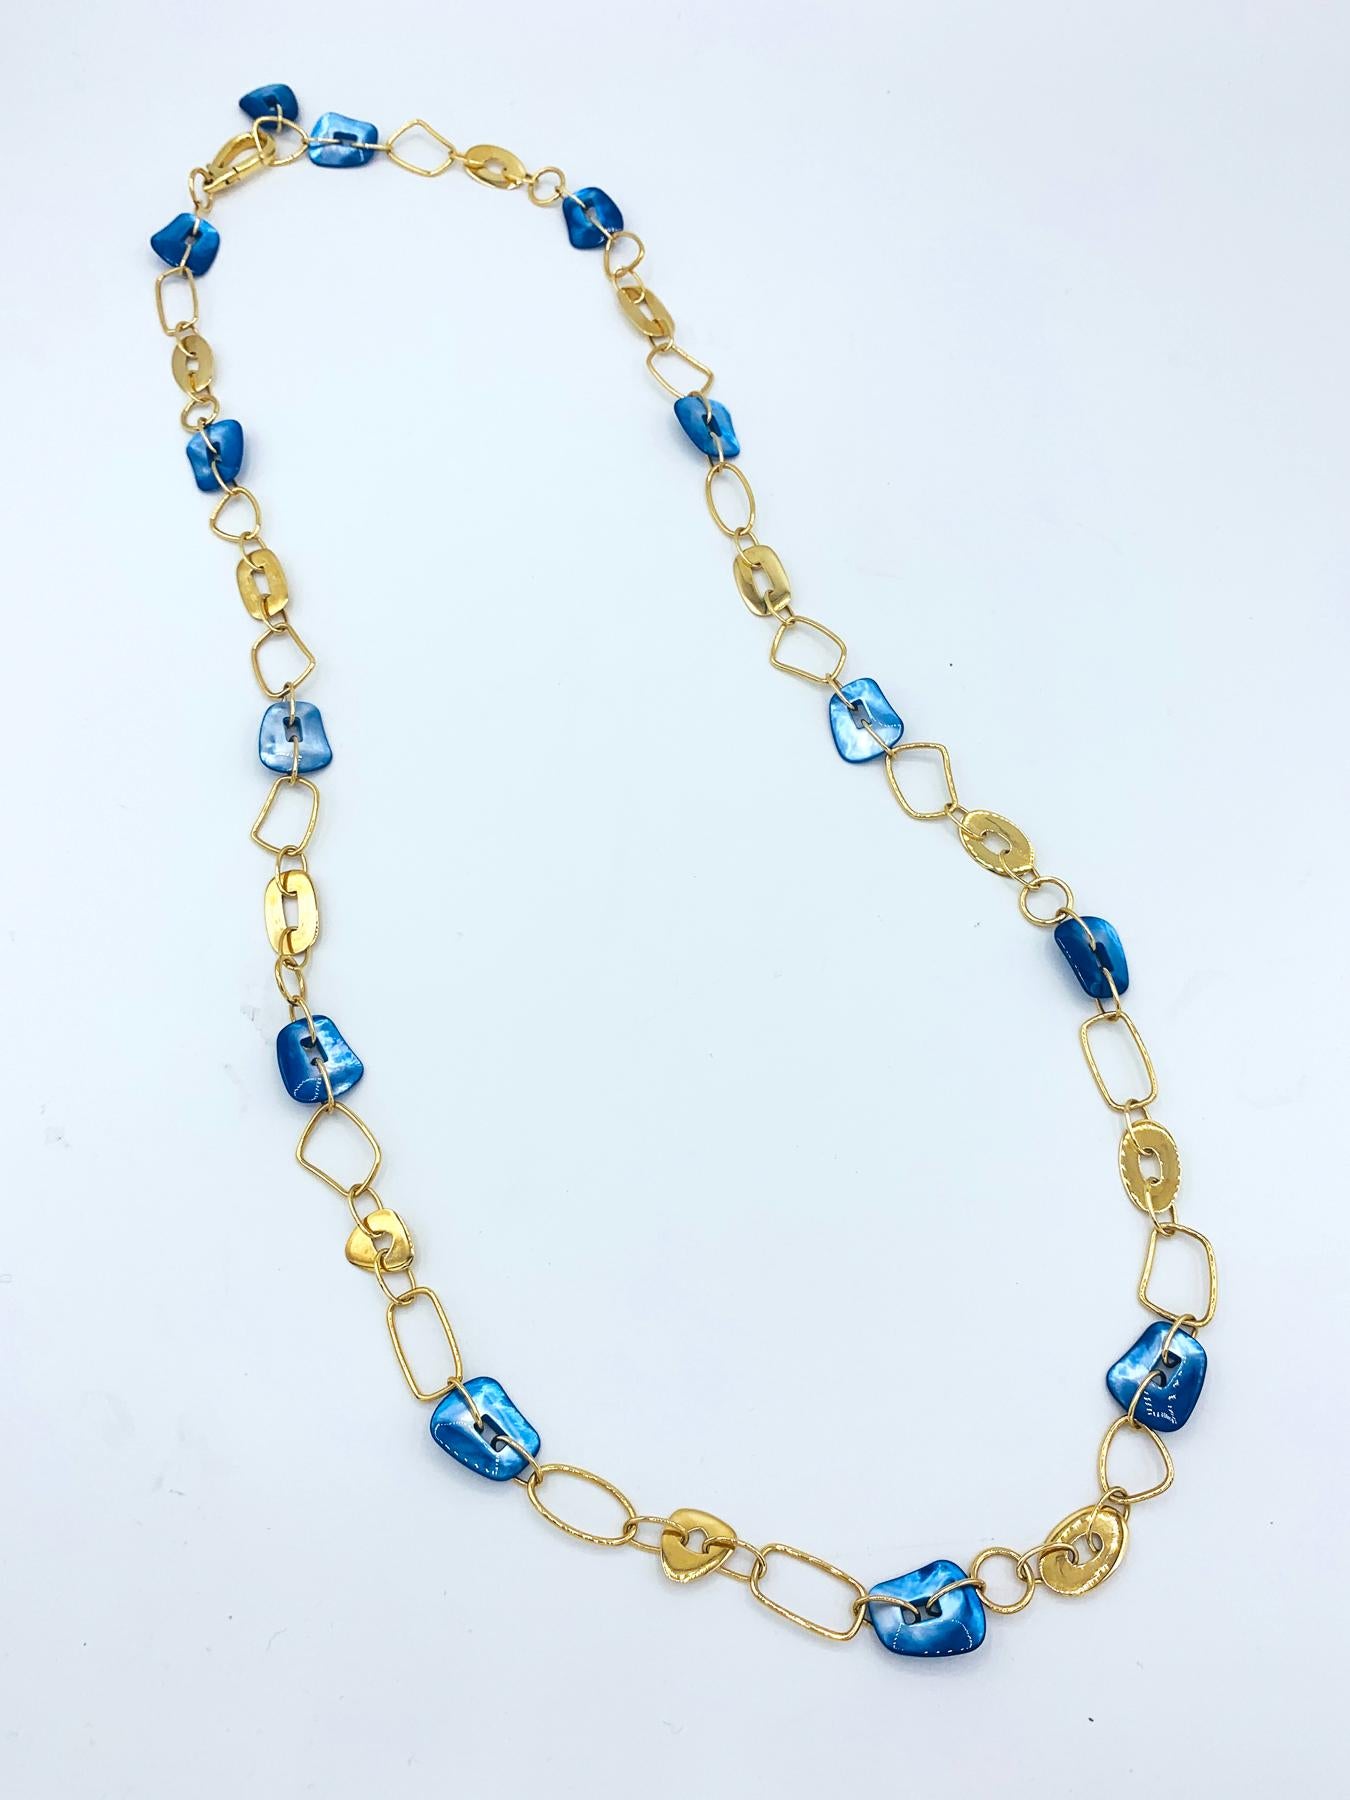 Rendered in high polish, 18K yellow gold with Indigo Blue Mother of Pearl 'puzzles', this necklace from the Puzzle Collection by Mattioli, blends inspiration both from abstract art and the 70s.

This necklace is finished with a clasp and logo charm.